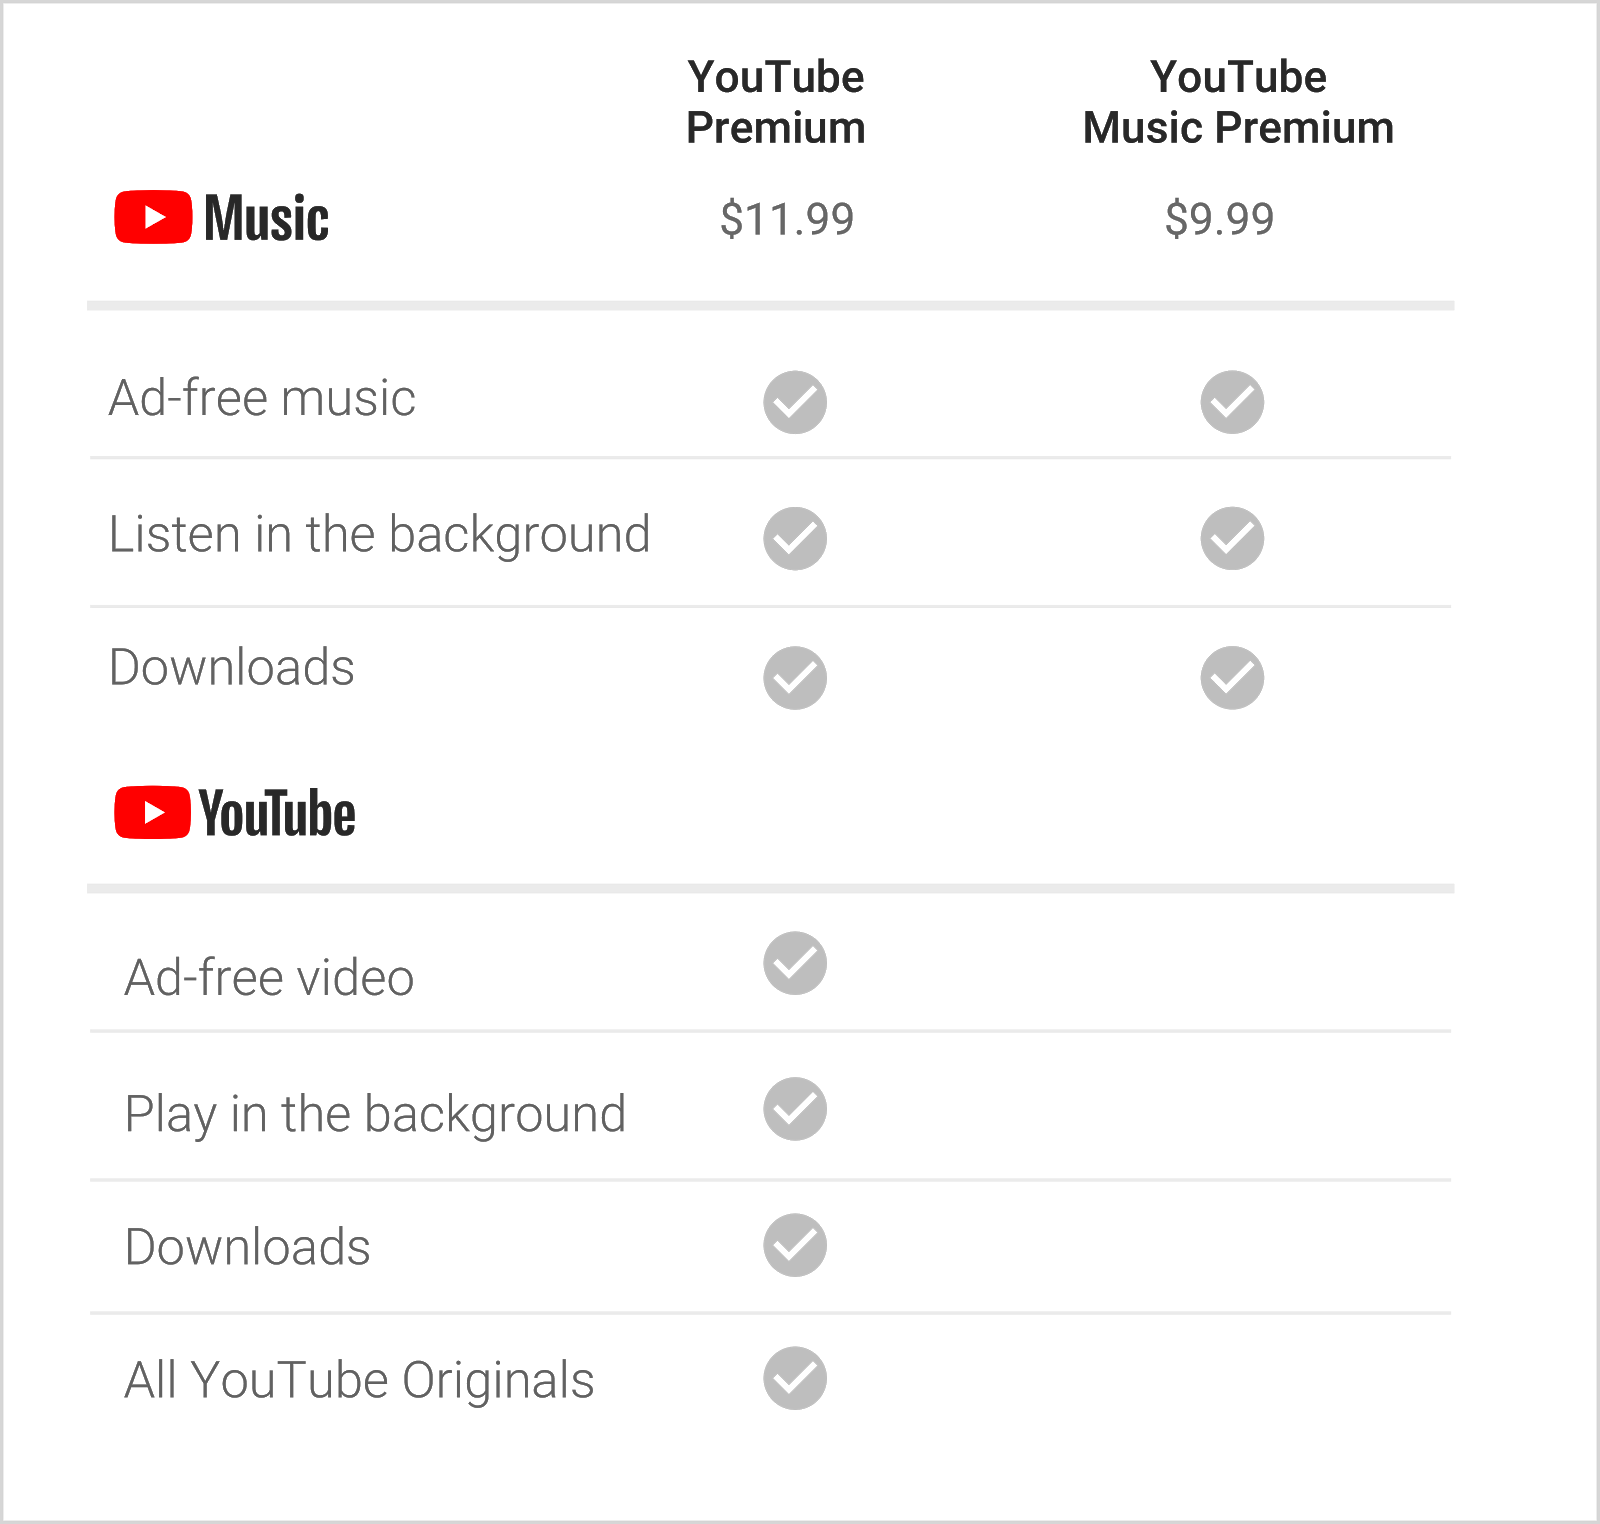 5 16 Latest Chart for BlogPost YouTube Premium and YouTube Music are coming May 22